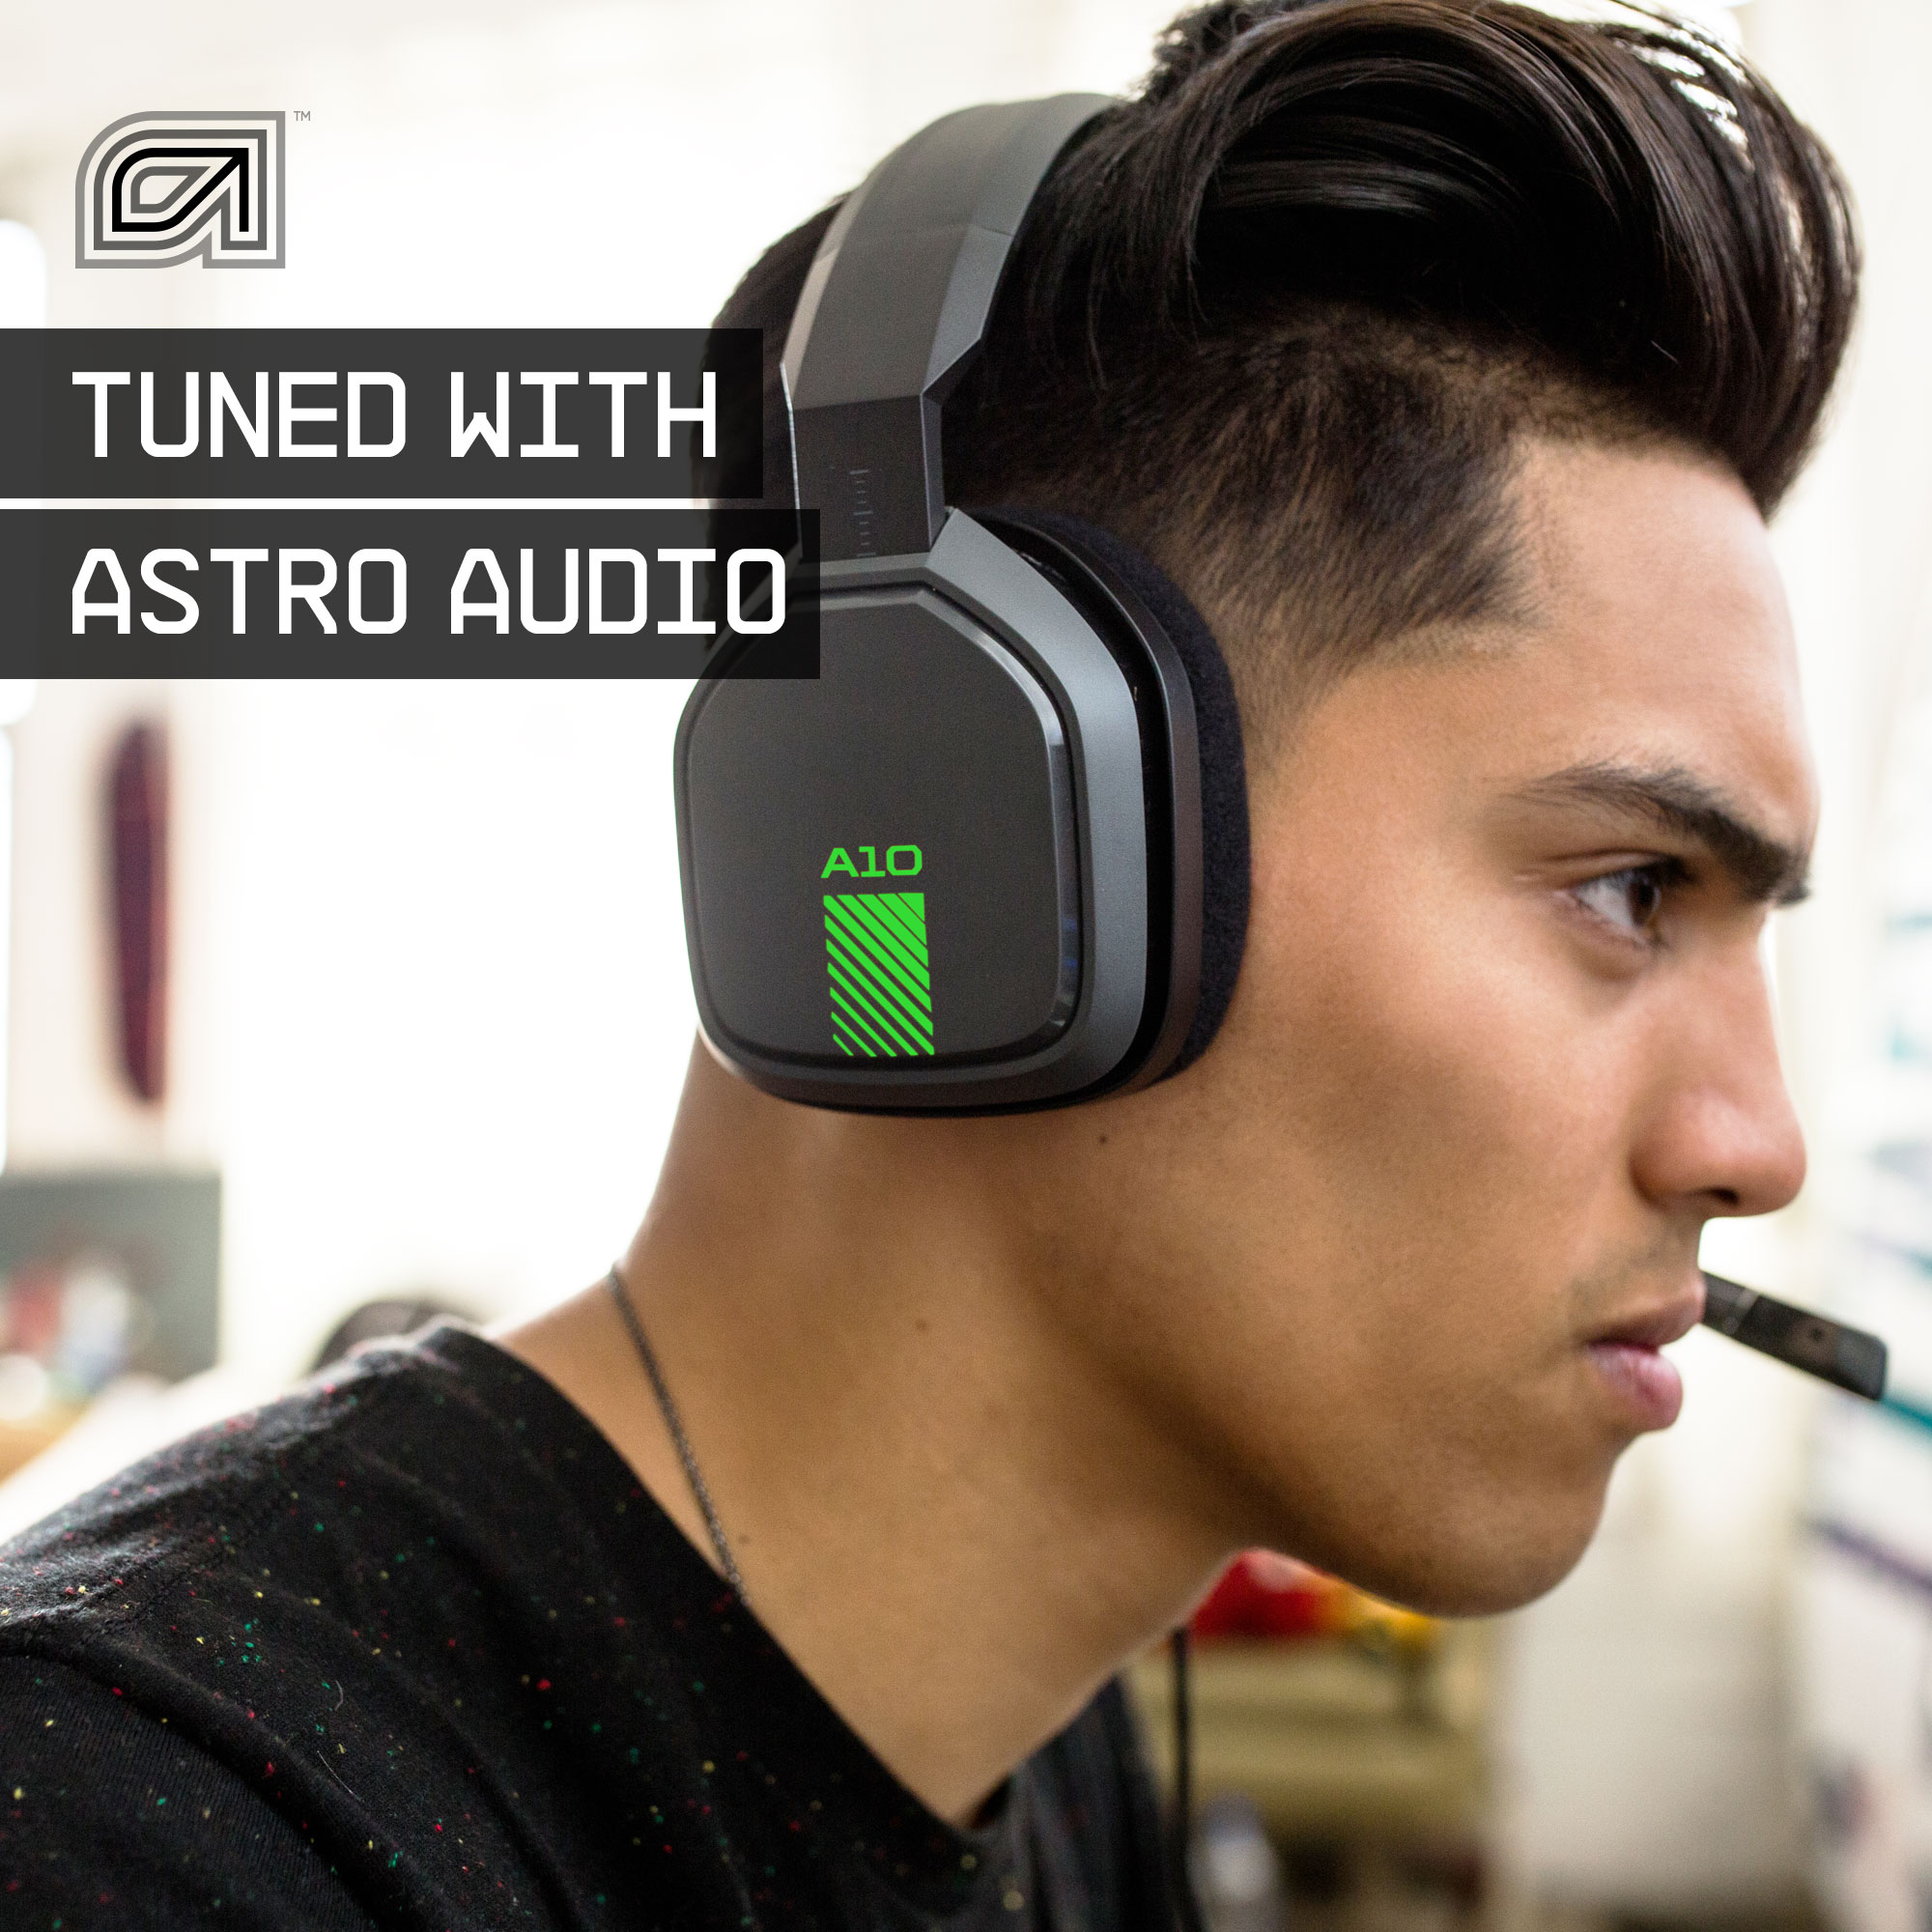 Astro A10 XB1 Headset - image 4 of 9